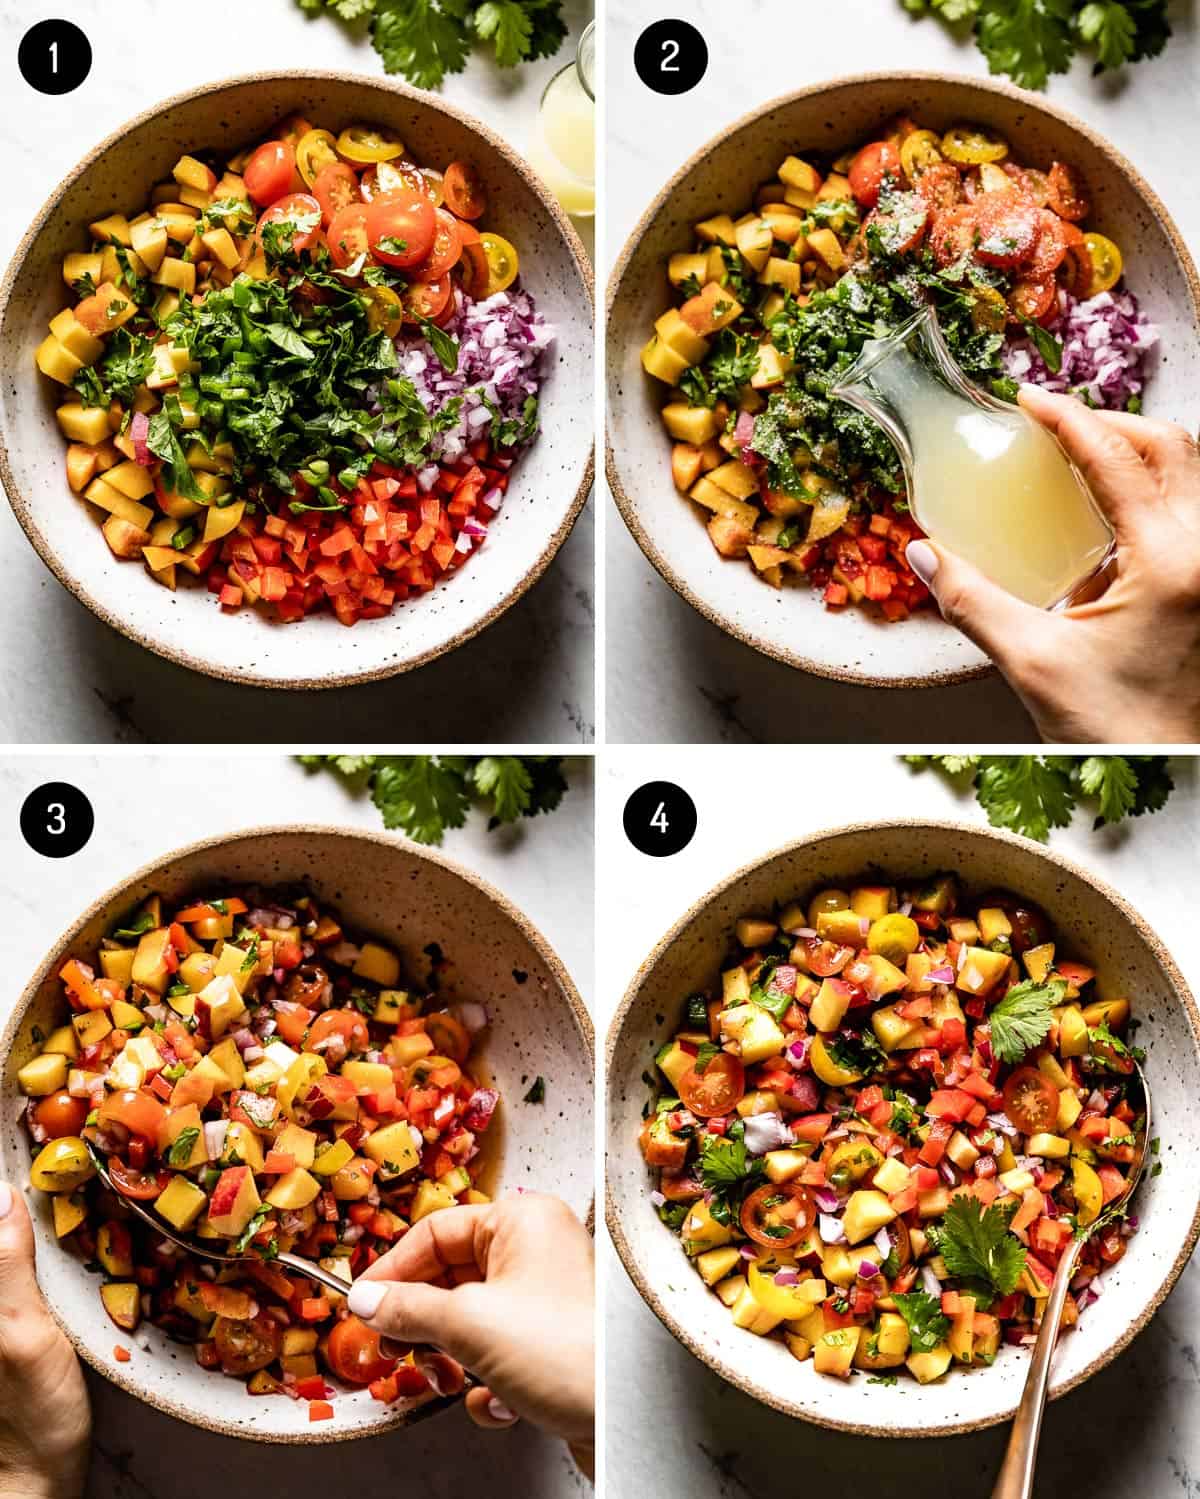 A collage of images showing how to make peach salsa